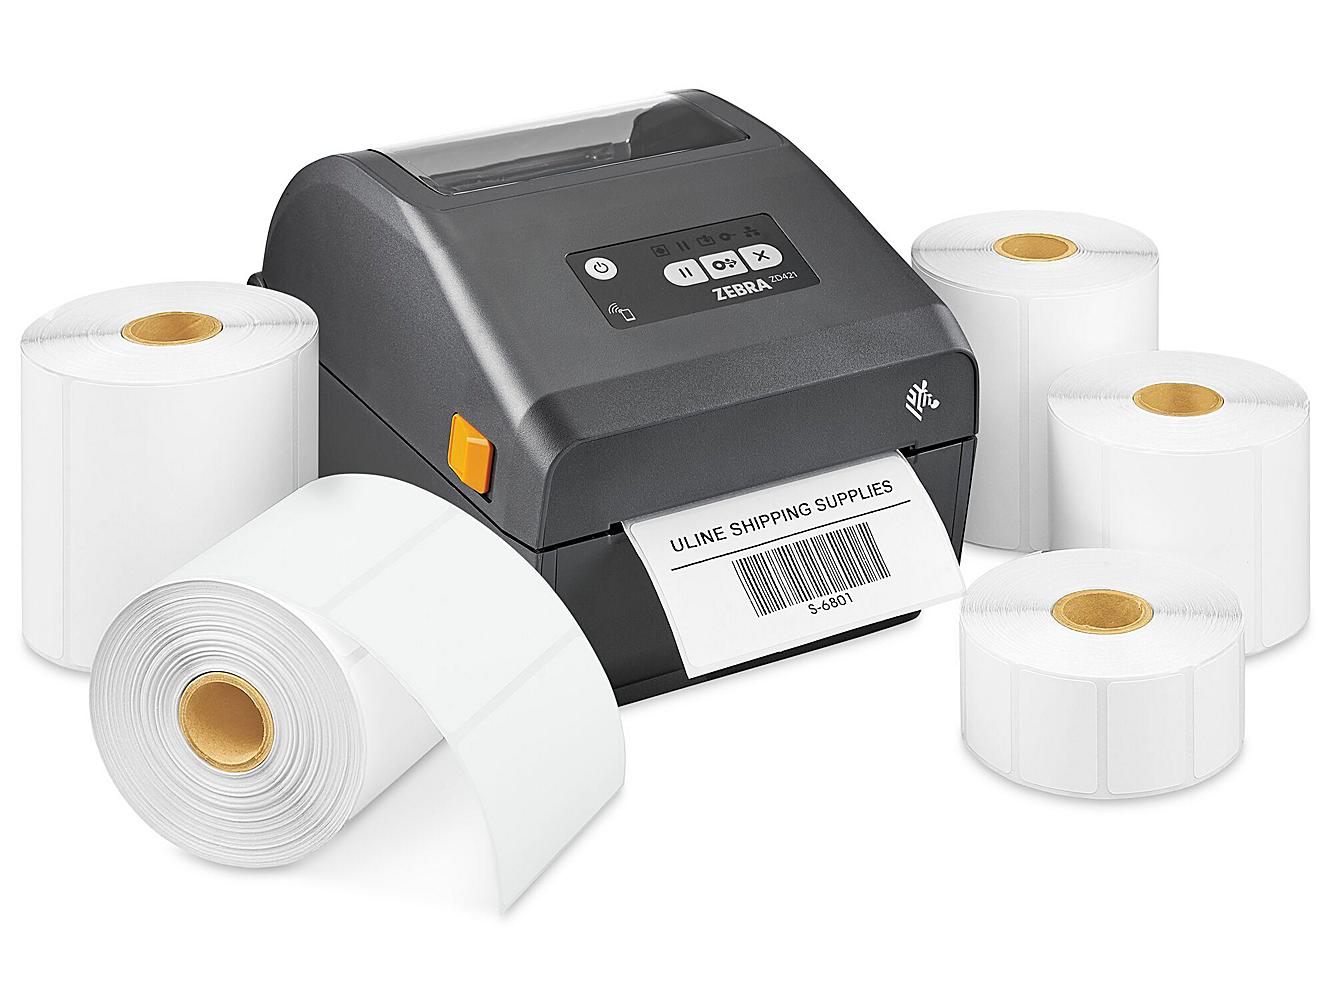 New Details about   ULINE DIRECT Thermal Labels S-8001 2 Boxes 12 Rolls in ea. 